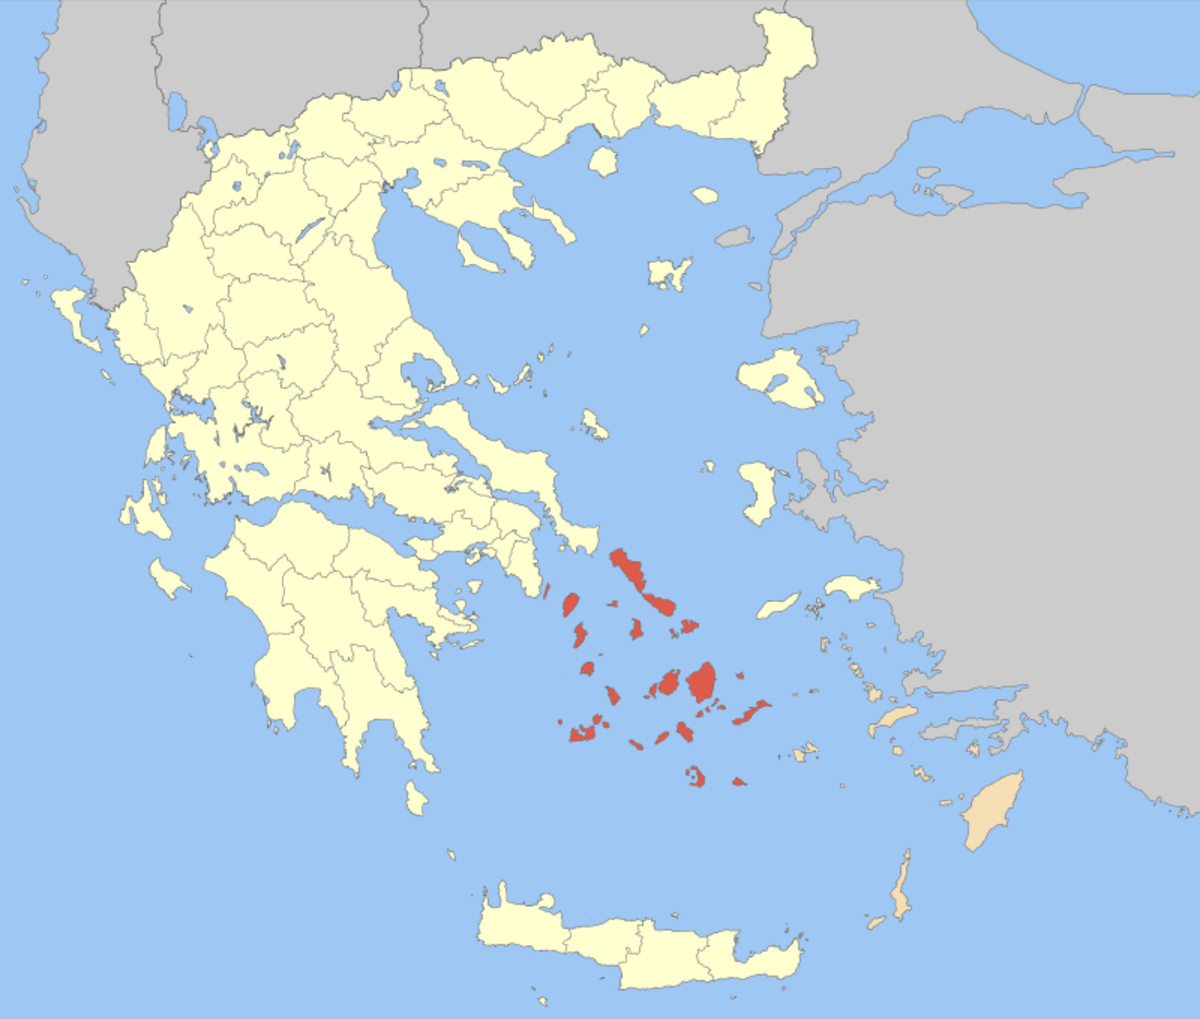 The Cyclades group of islands, part of the Aegean archipelago, south east of mainland Greece in the Aegean Sea.